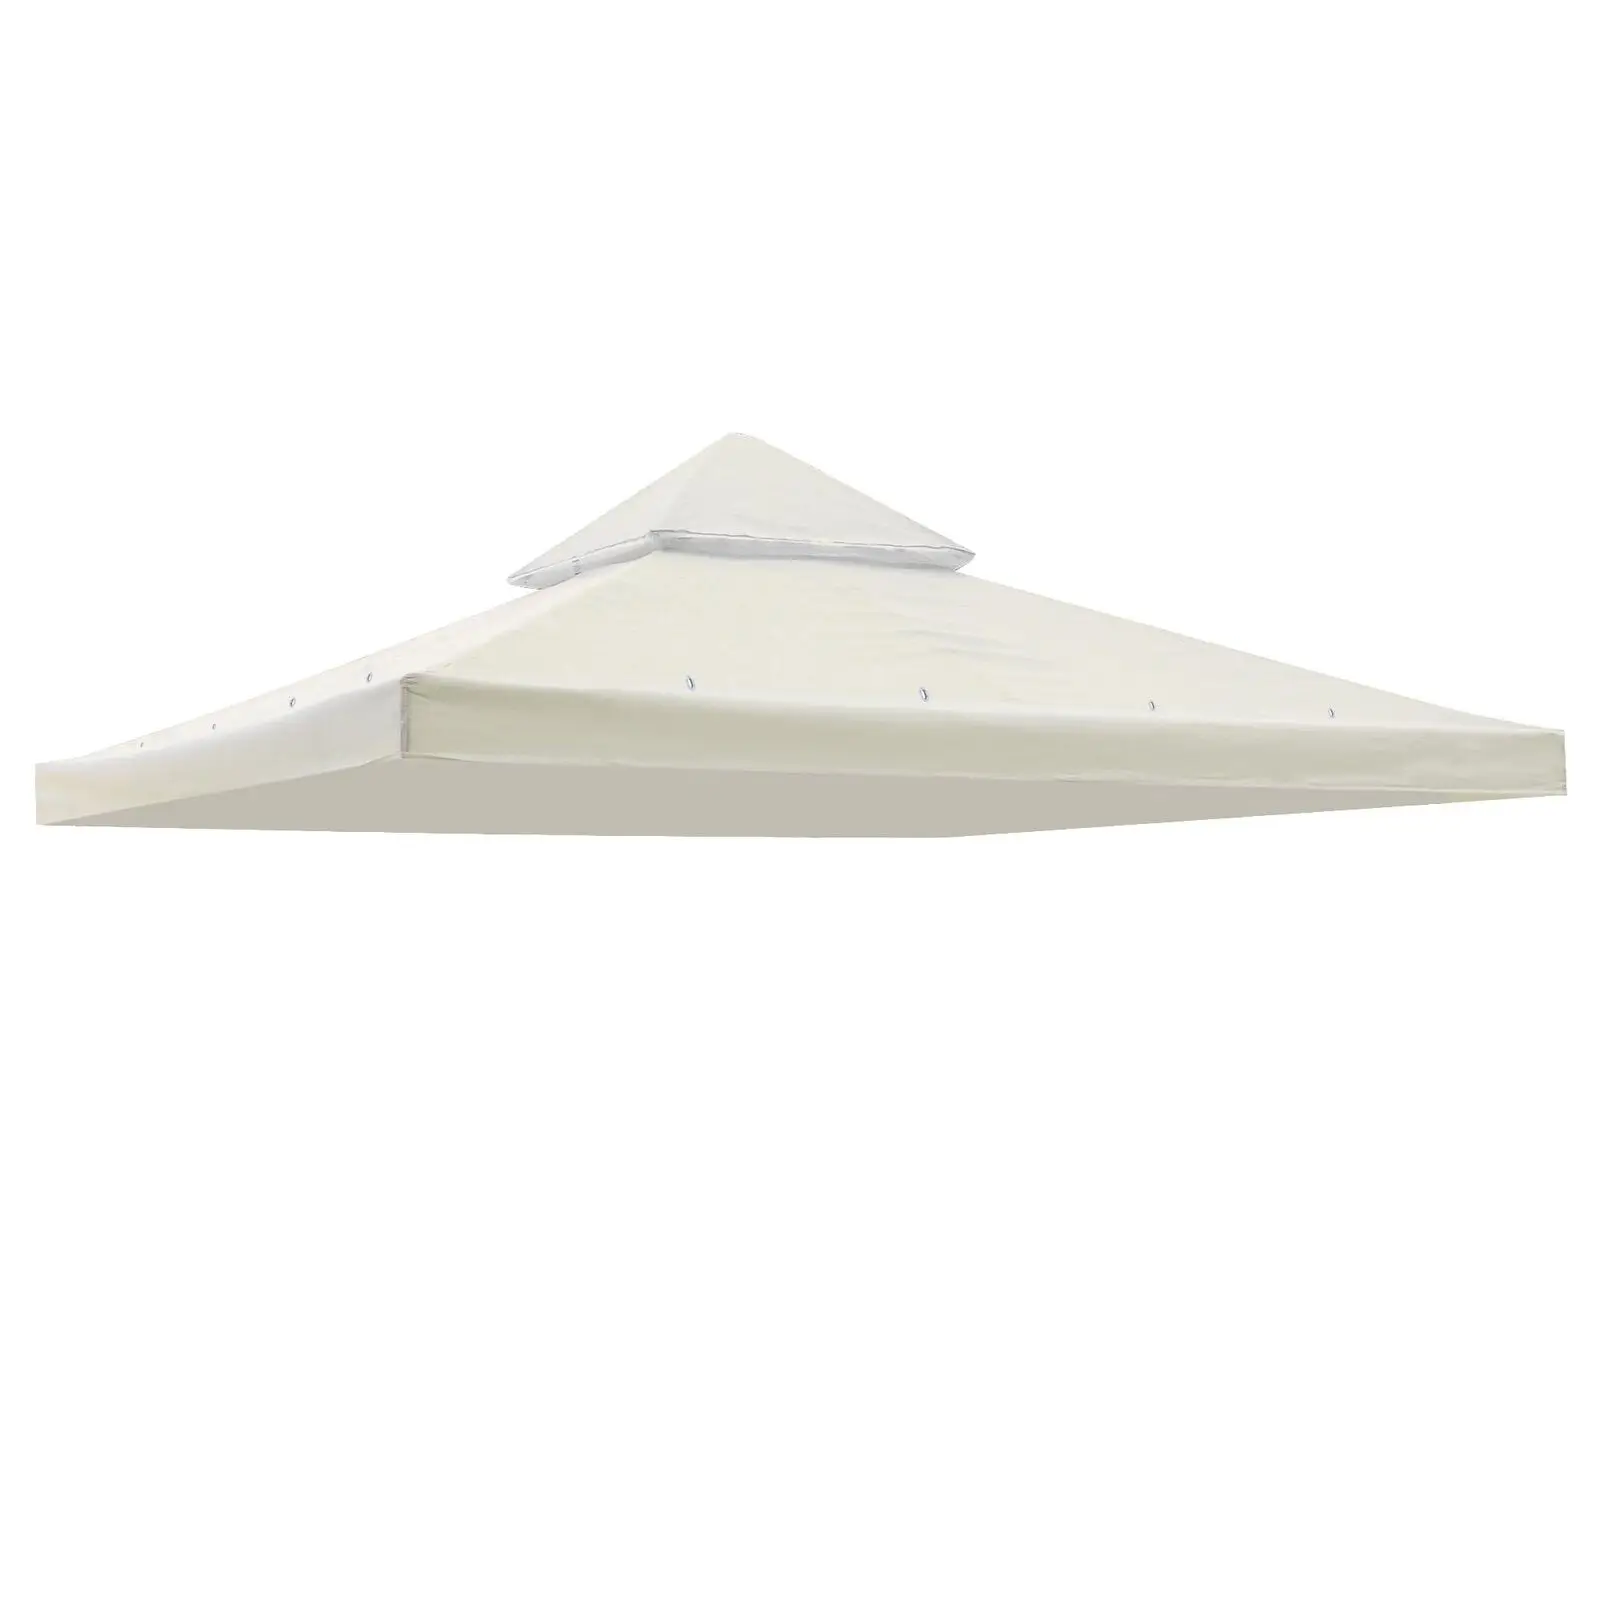 

9.76ft X 9.76ft 2-tier Tent Top Gazebo Canopy Replacement UV30+ Ivory White